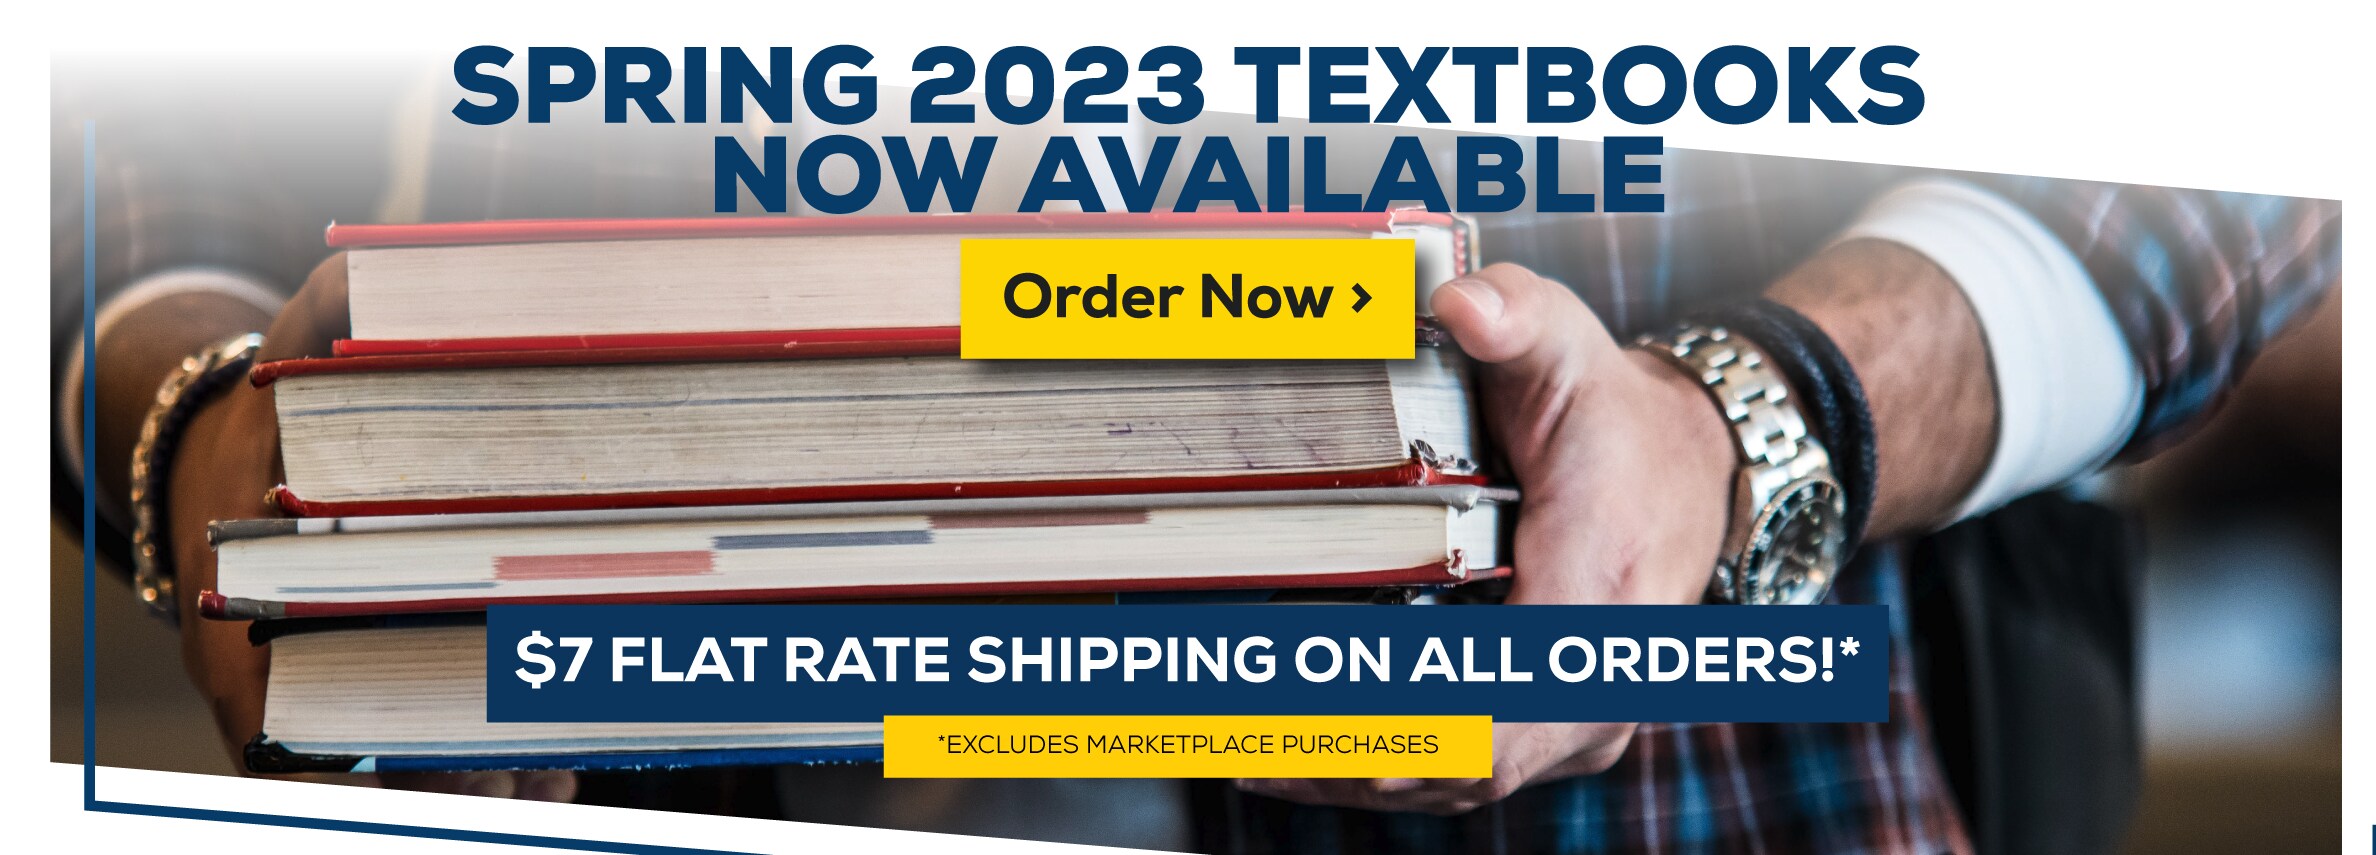 Spring 2023 Textbooks now available. order now. $7 Flat rate shipping on all orders!* Excludes Marketplace Purchases